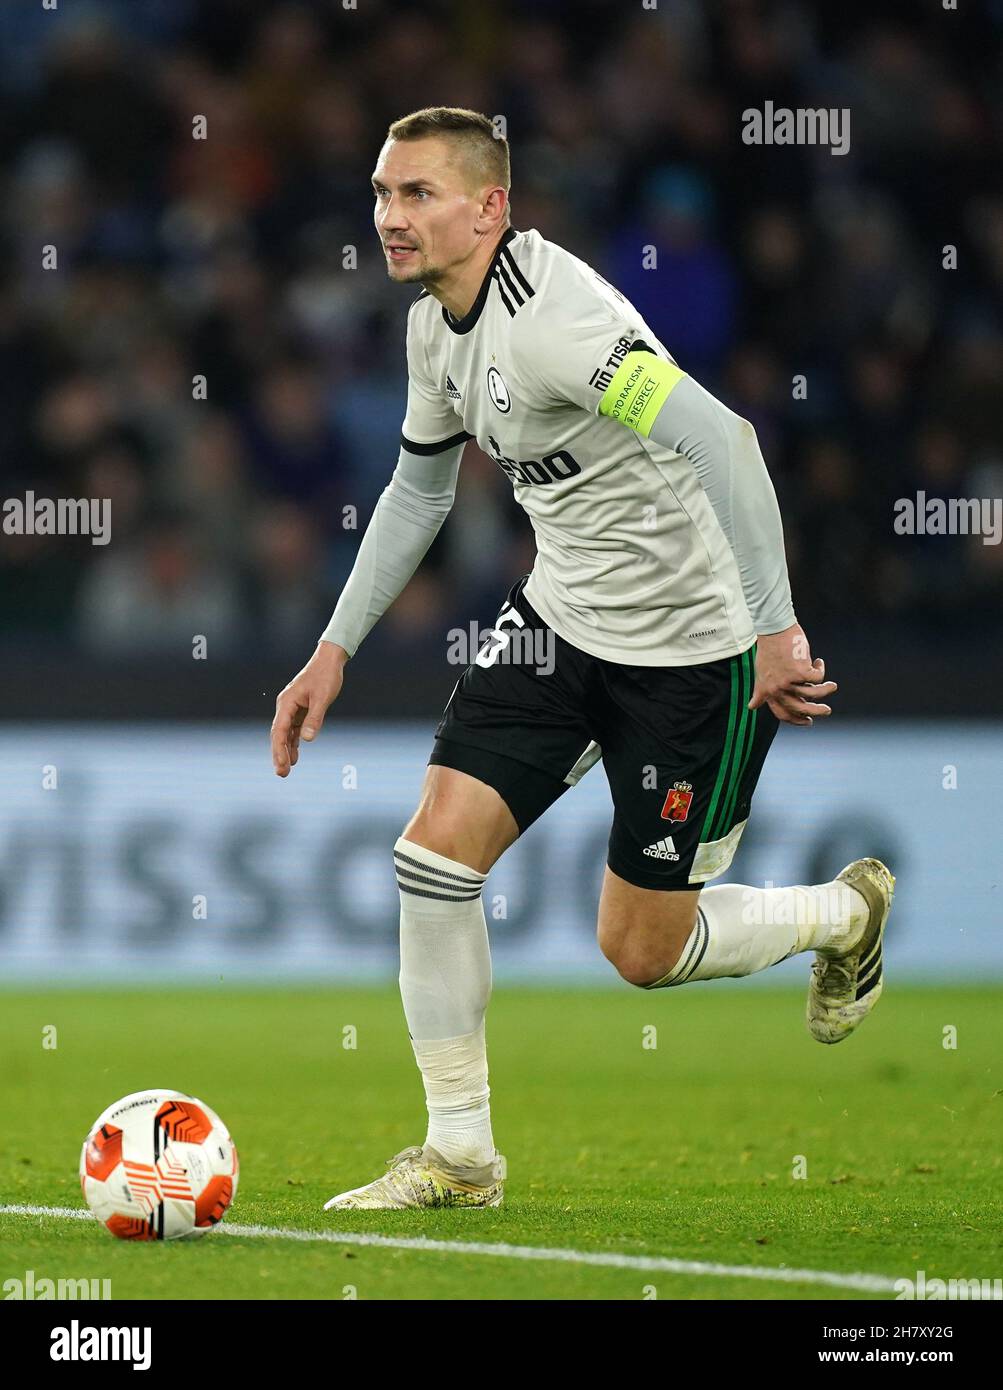 Legia Warsaw's Artur Jedrzejczyk during the UEFA Europa League, Group C match at the King Power Stadium, Leicester. Picture date: Thursday November 25, 2021. Stock Photo